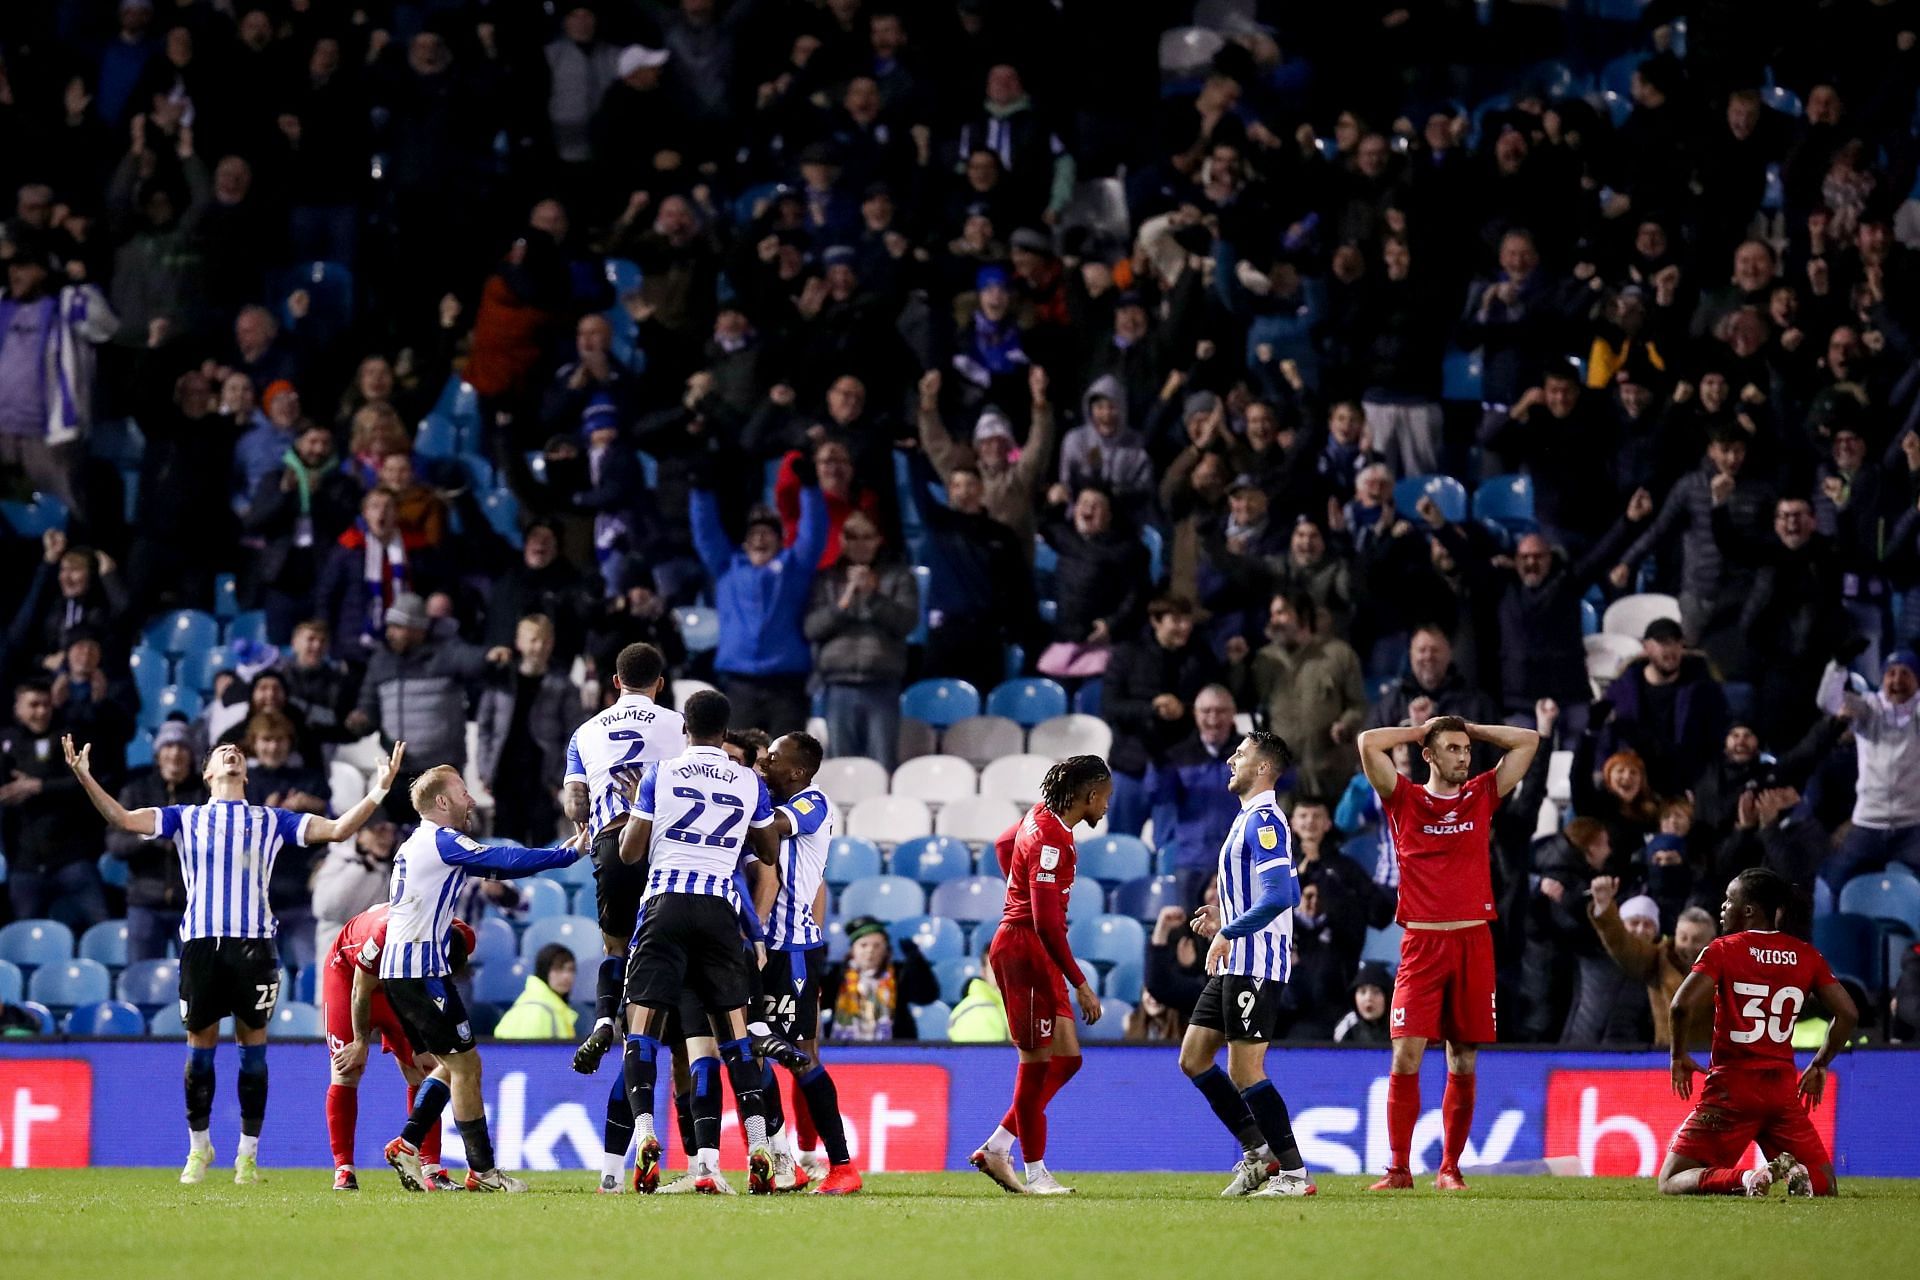 Sheffield Wednesday will face Accrington Stanley on Wednesday - Sky Bet League One